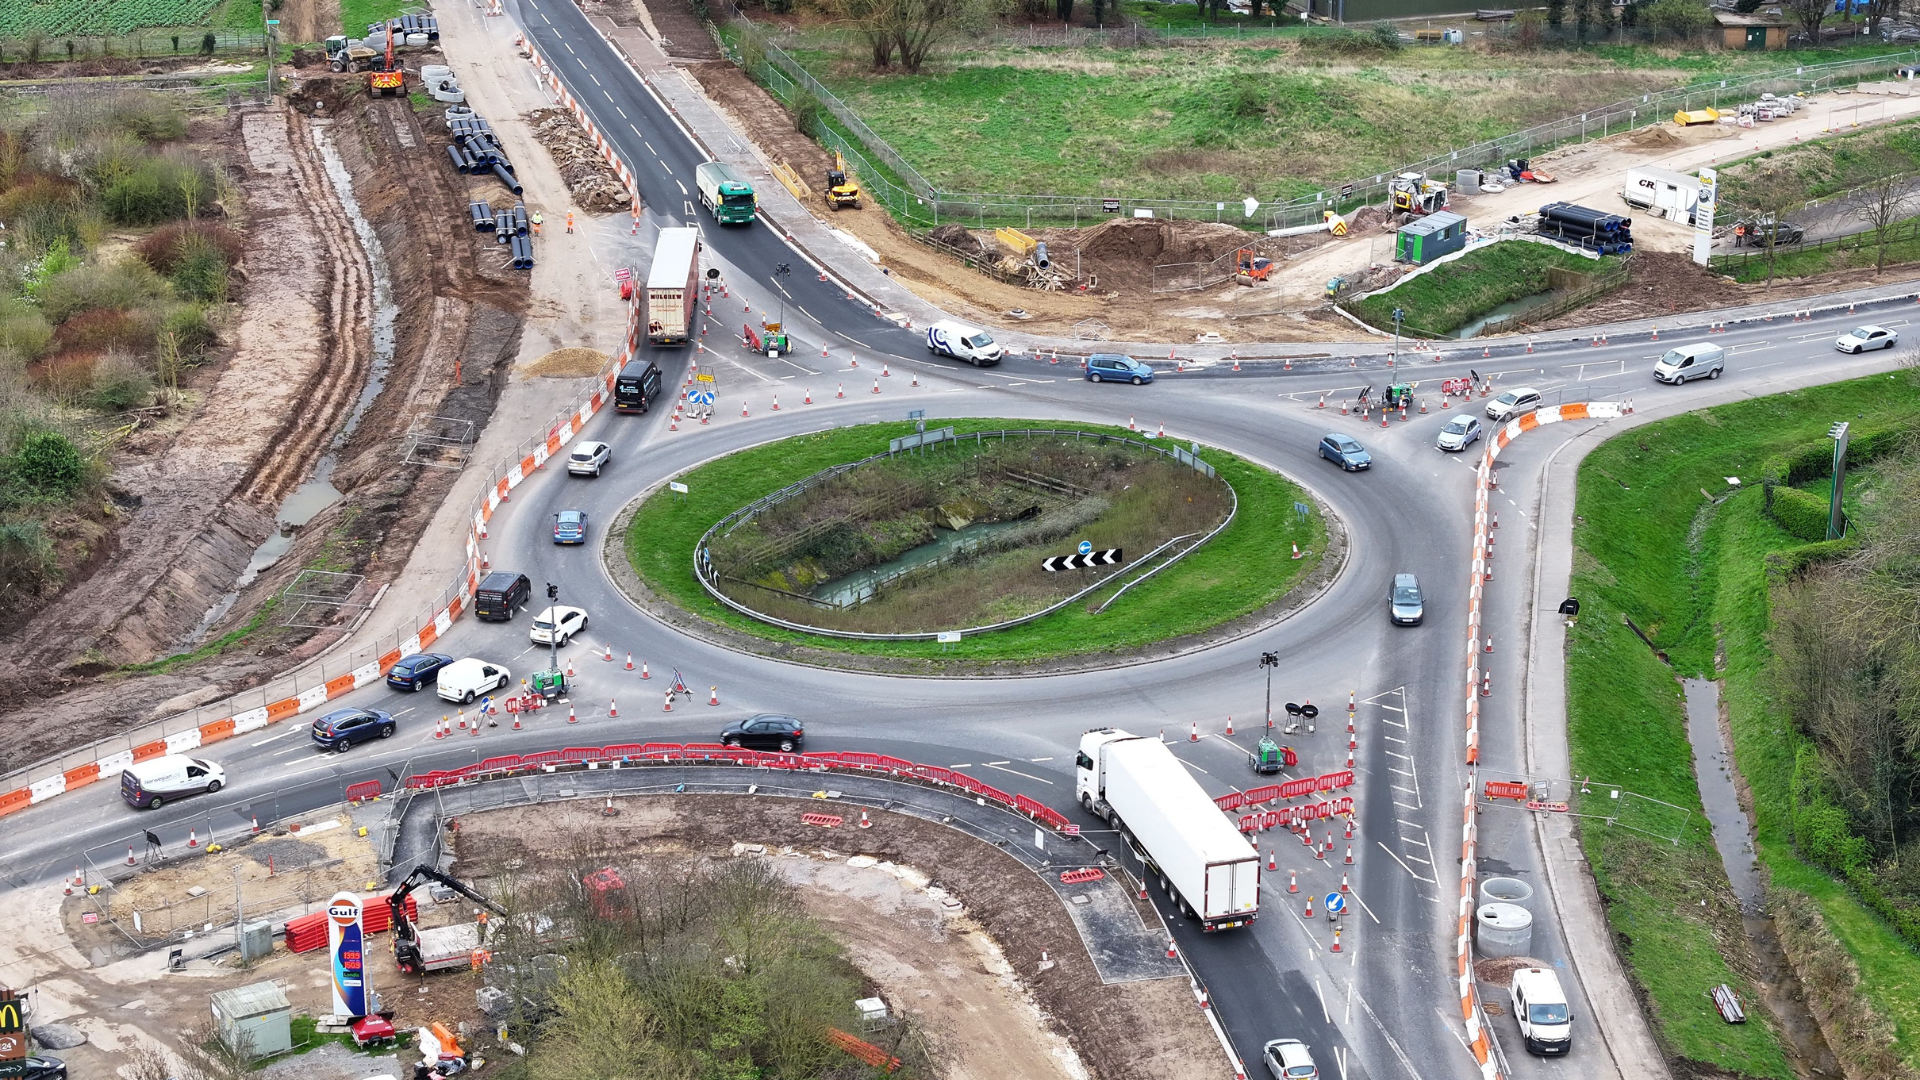 An overhead view of the Springfield Roundabout.